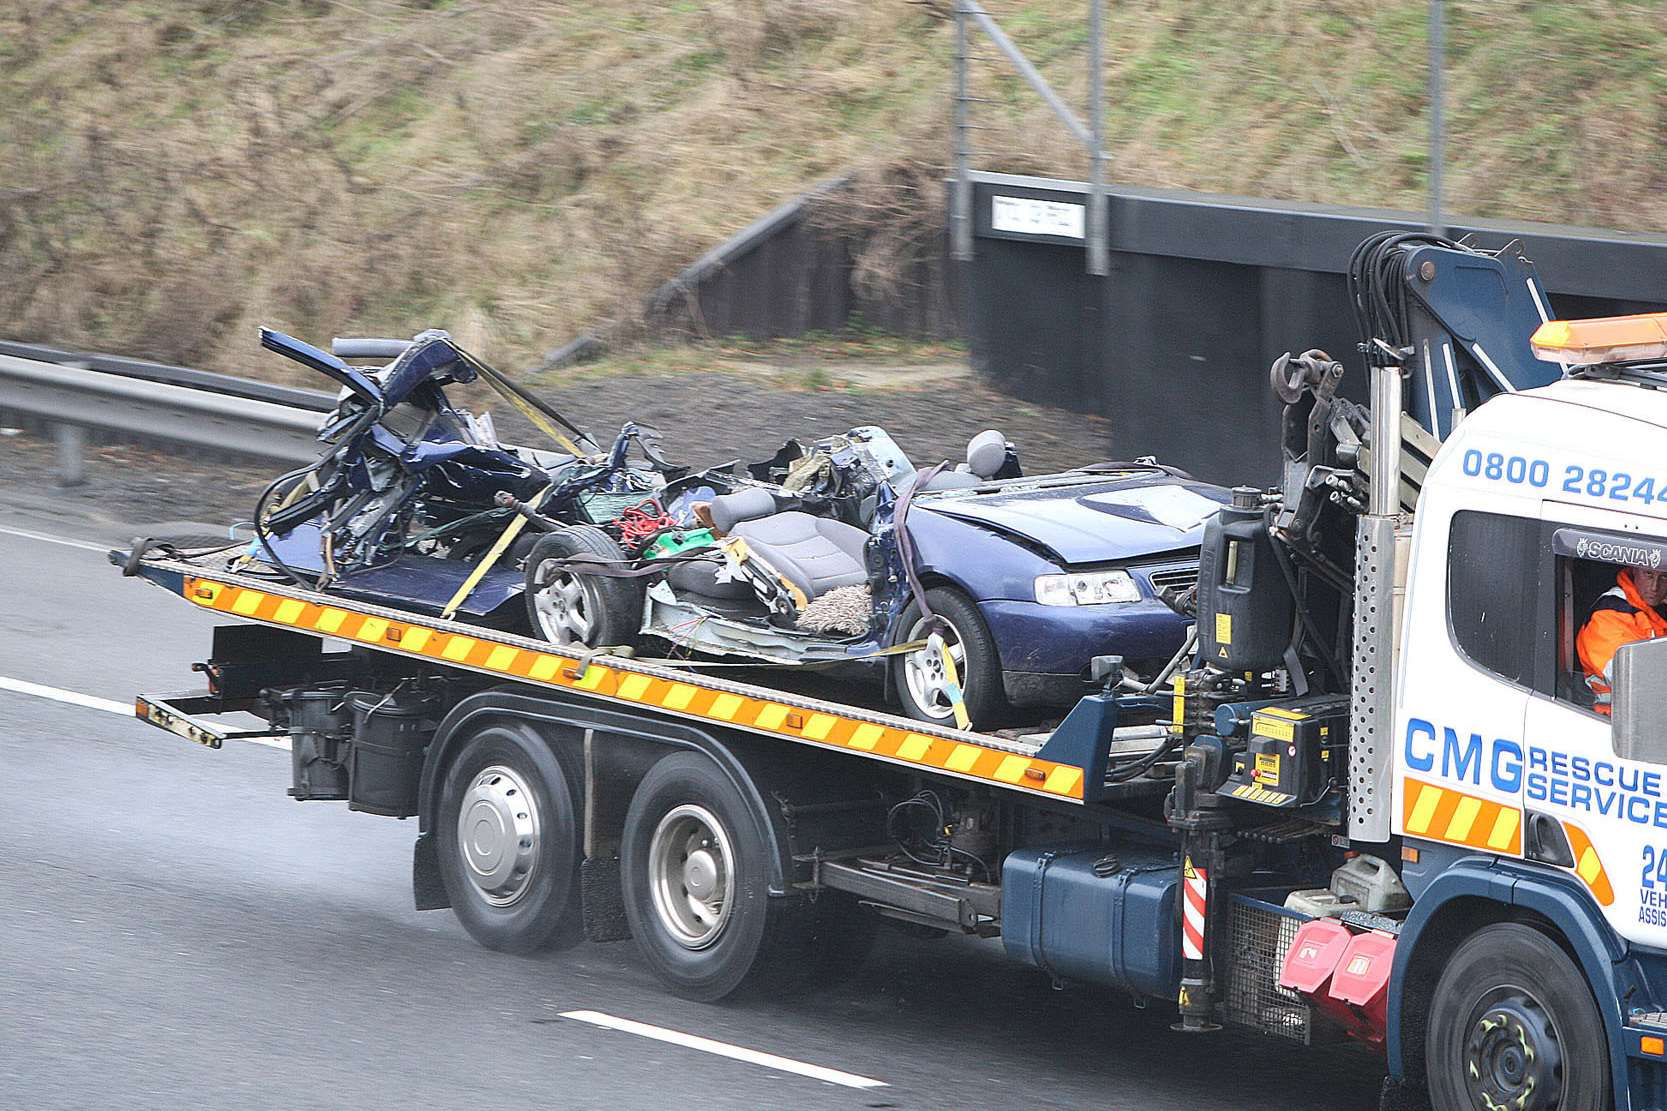 The crushed car which Alan Peters hit with his coach. Picture: South Beds News Agency